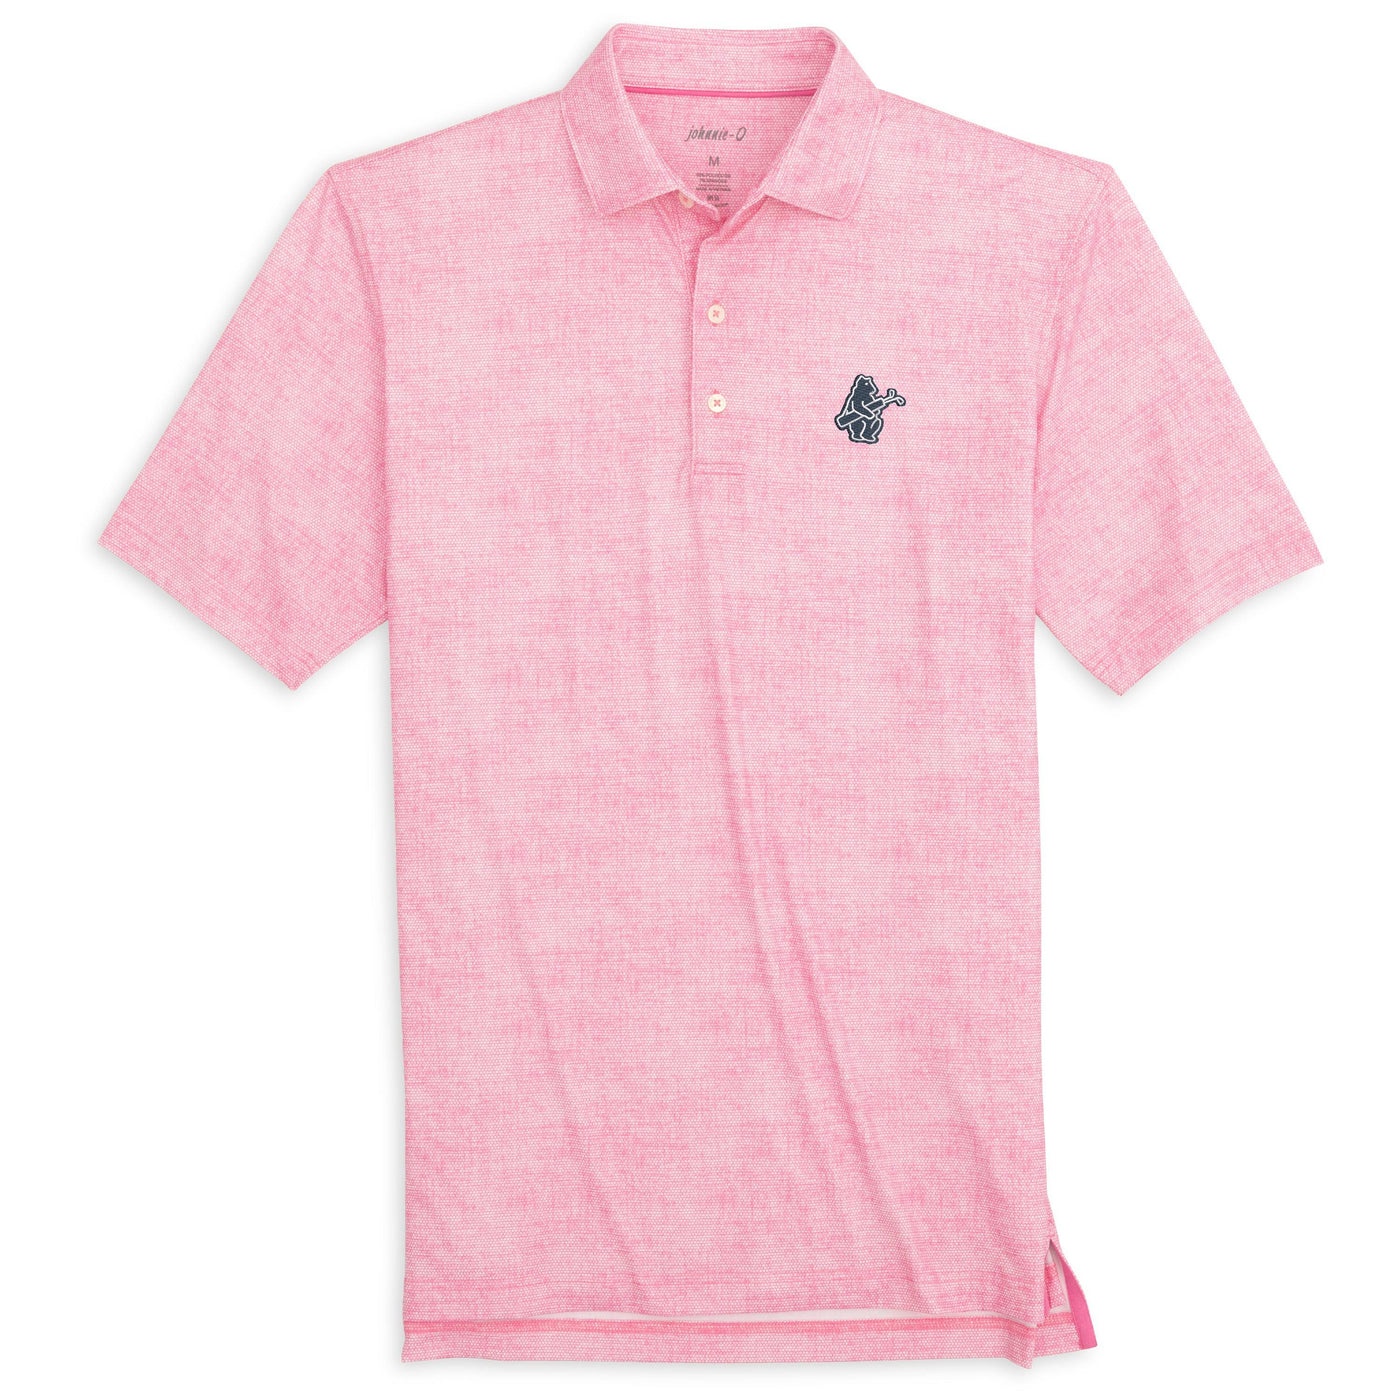 CHICAGO CUBS JOHNNIE O MEN'S 1914 GOLF PINK GIBSON POLO